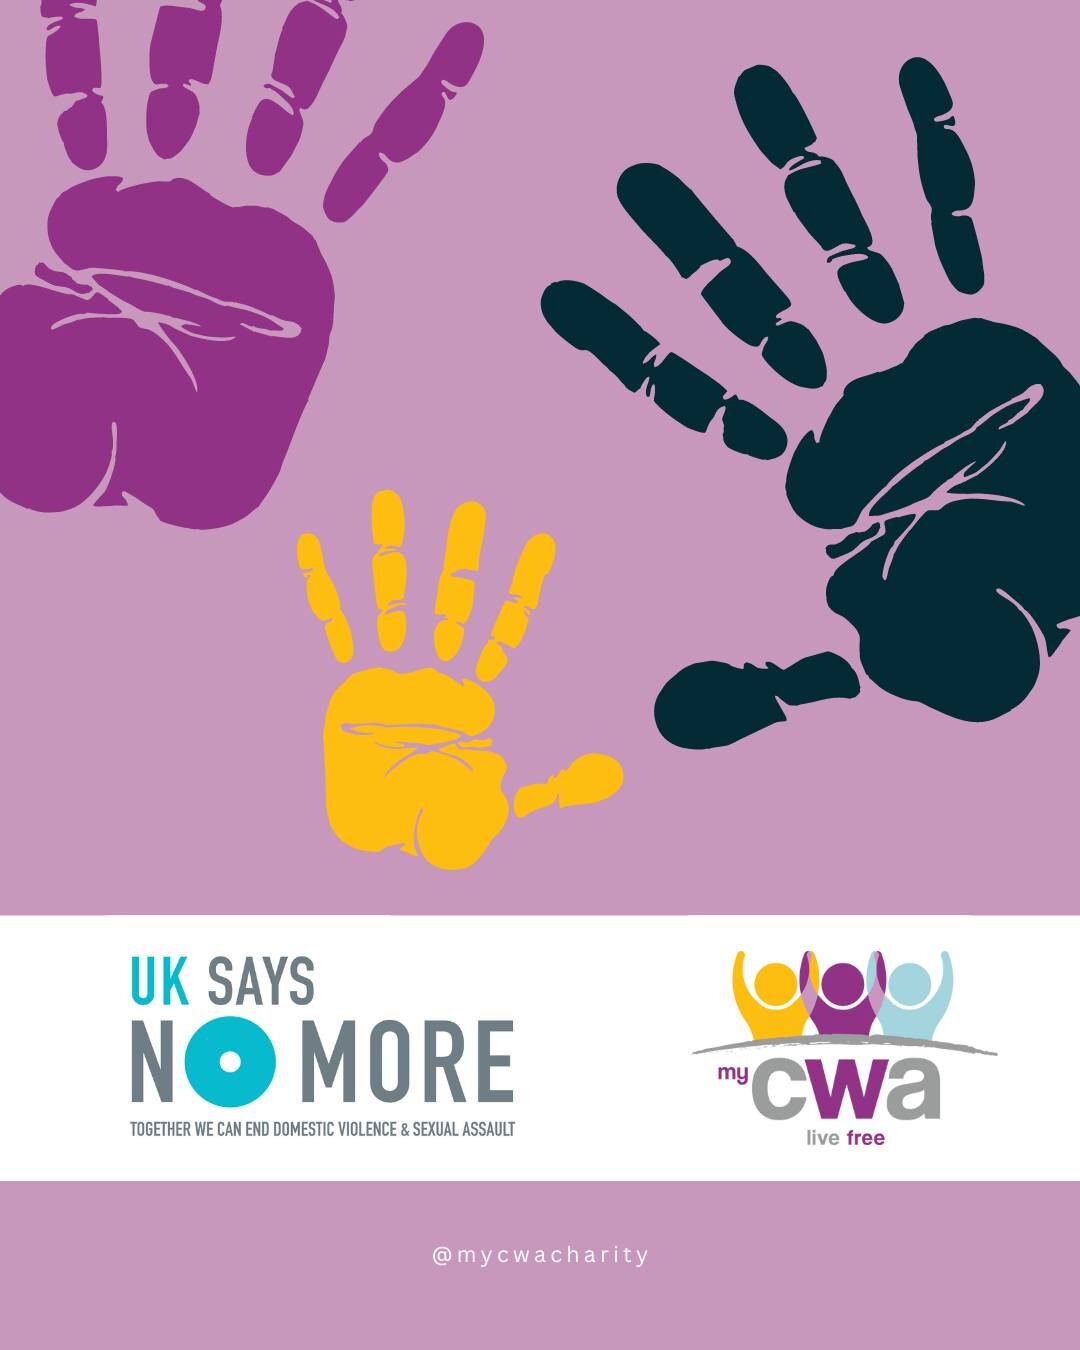 It's NO MORE Week (3rd&ndash;9th March) &ndash; a week dedicated to galvanizing grassroots activism and inspiring people to help create a culture of safety, respect and equality in their communities, with the aim of ending domestic and sexual violenc